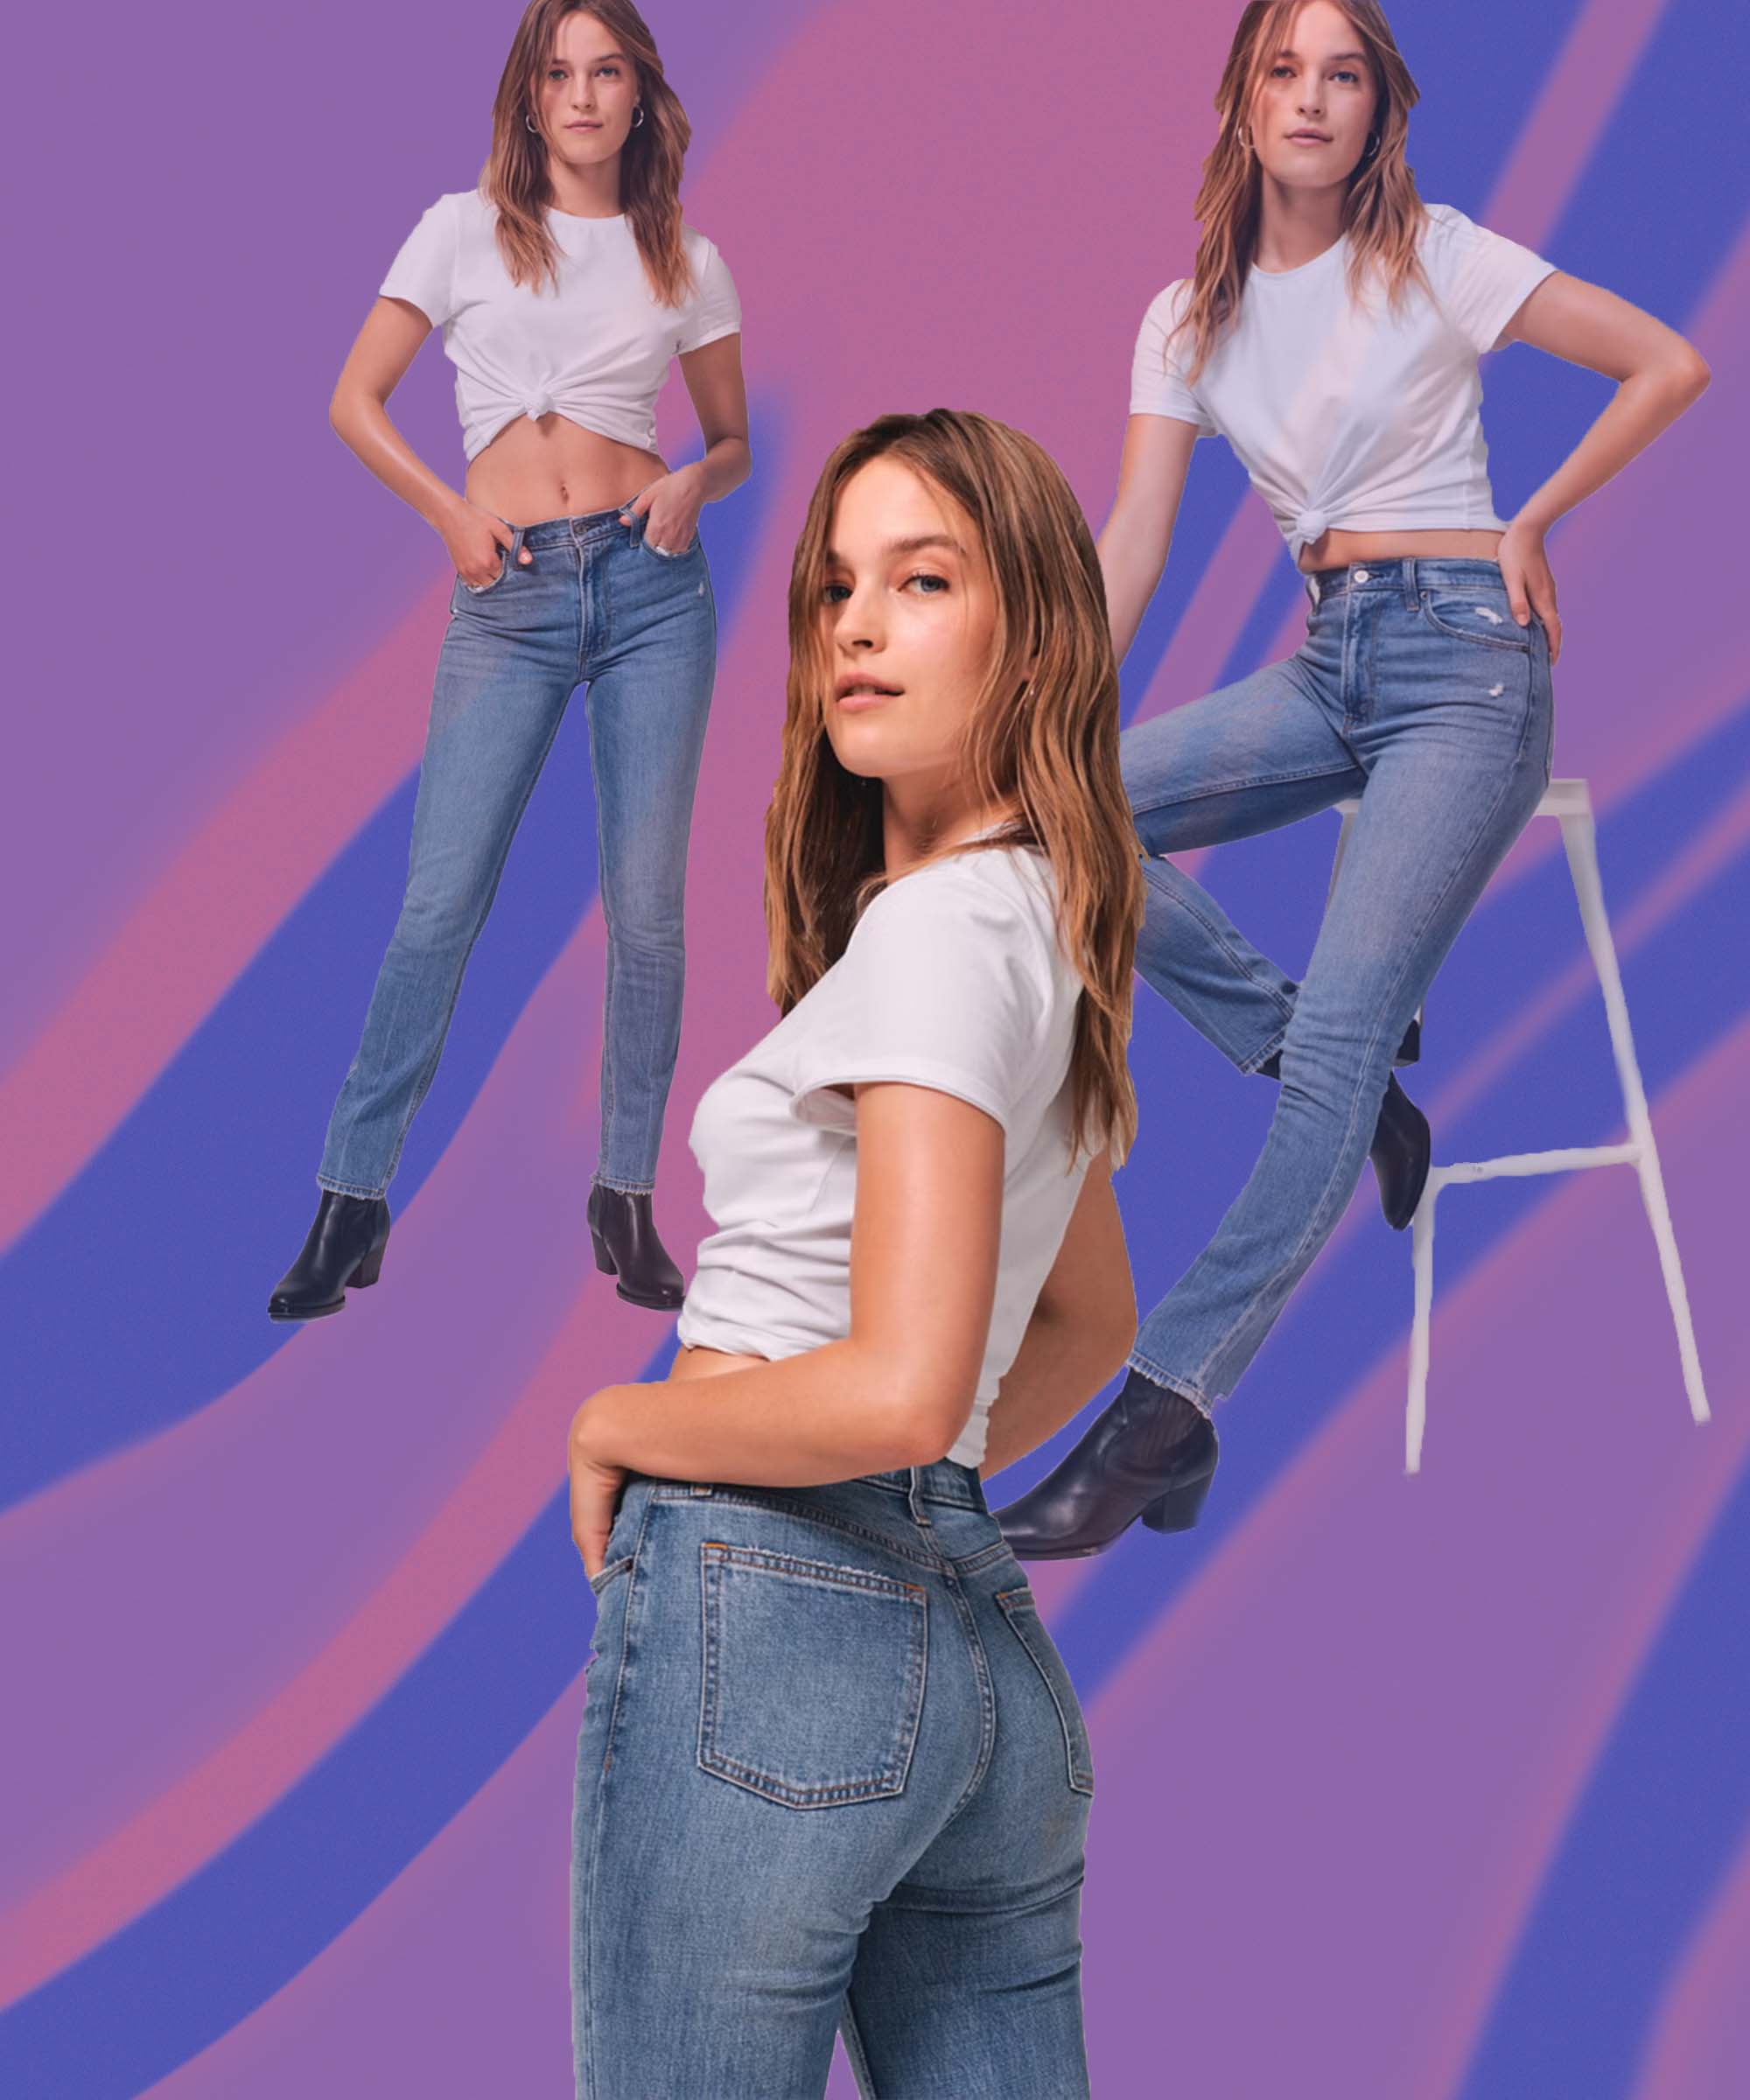 Yound sexy lady in crop top and mom jeans isolated on the white